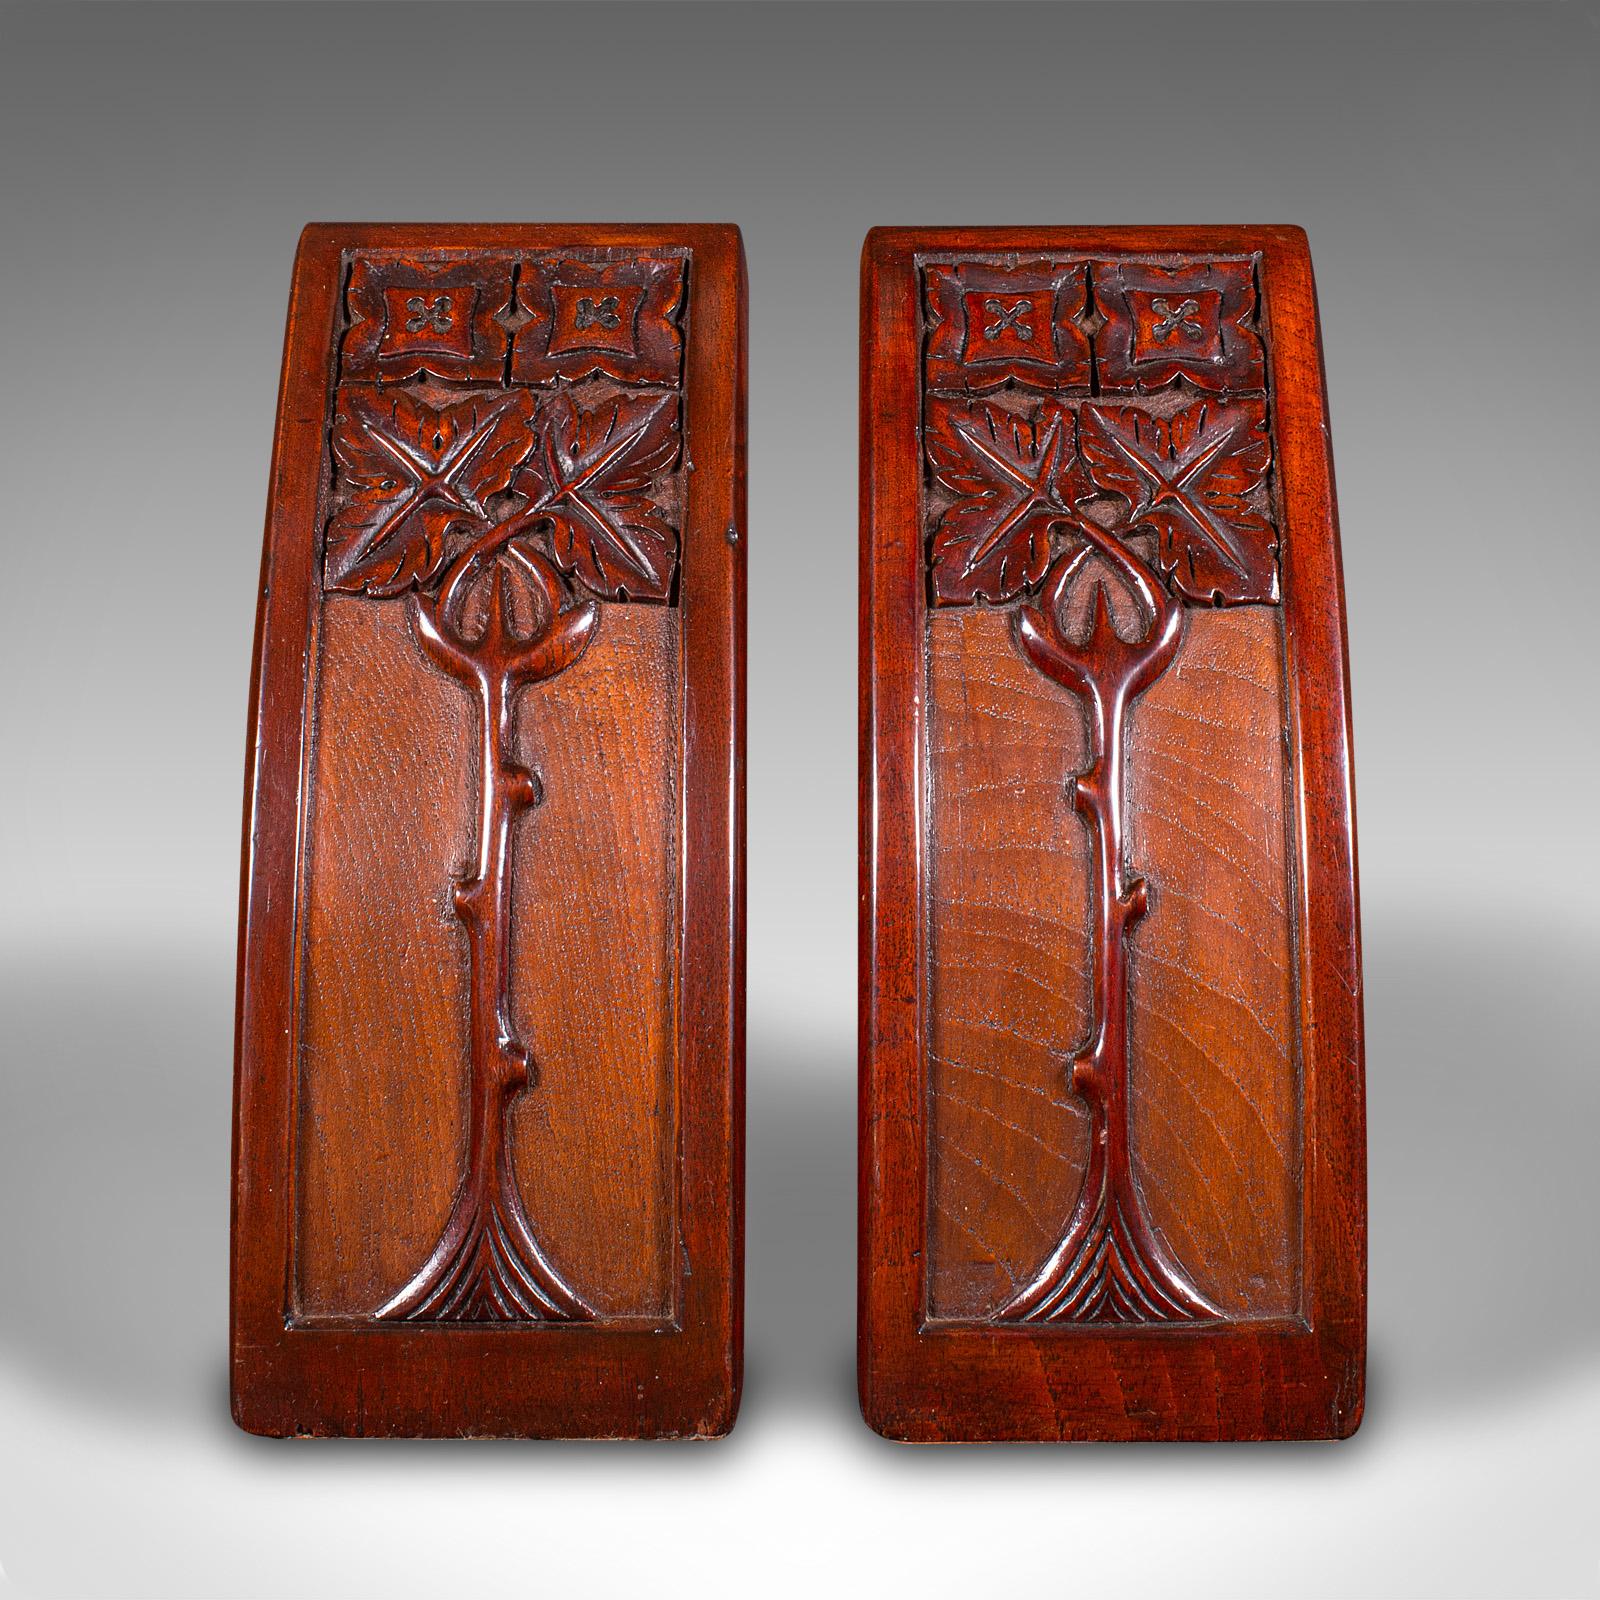 This is a large pair of antique weighted bookends. An English, mahogany carved book rest with Art Nouveau taste, dating to the Edwardian period, circa 1910.

Of wonderful form and weight, perfect for the larger book
Displaying a desirable aged